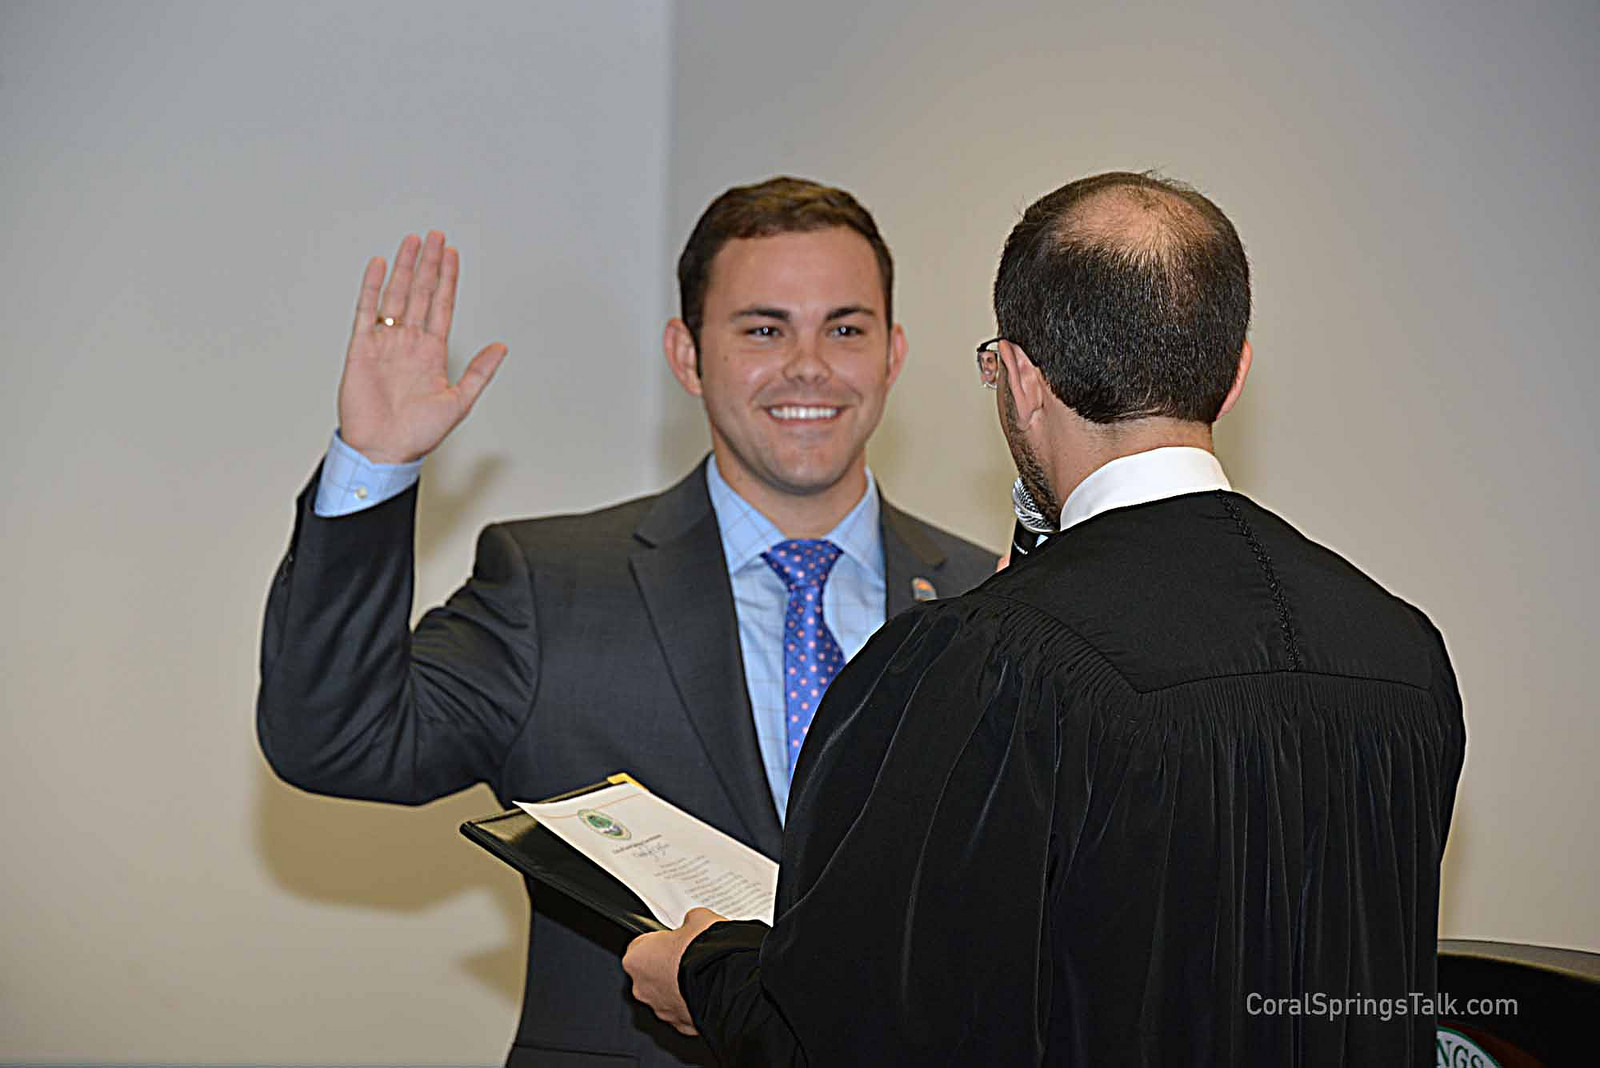 Dan Daley being sworn in for his second term by Judge Ari Porth